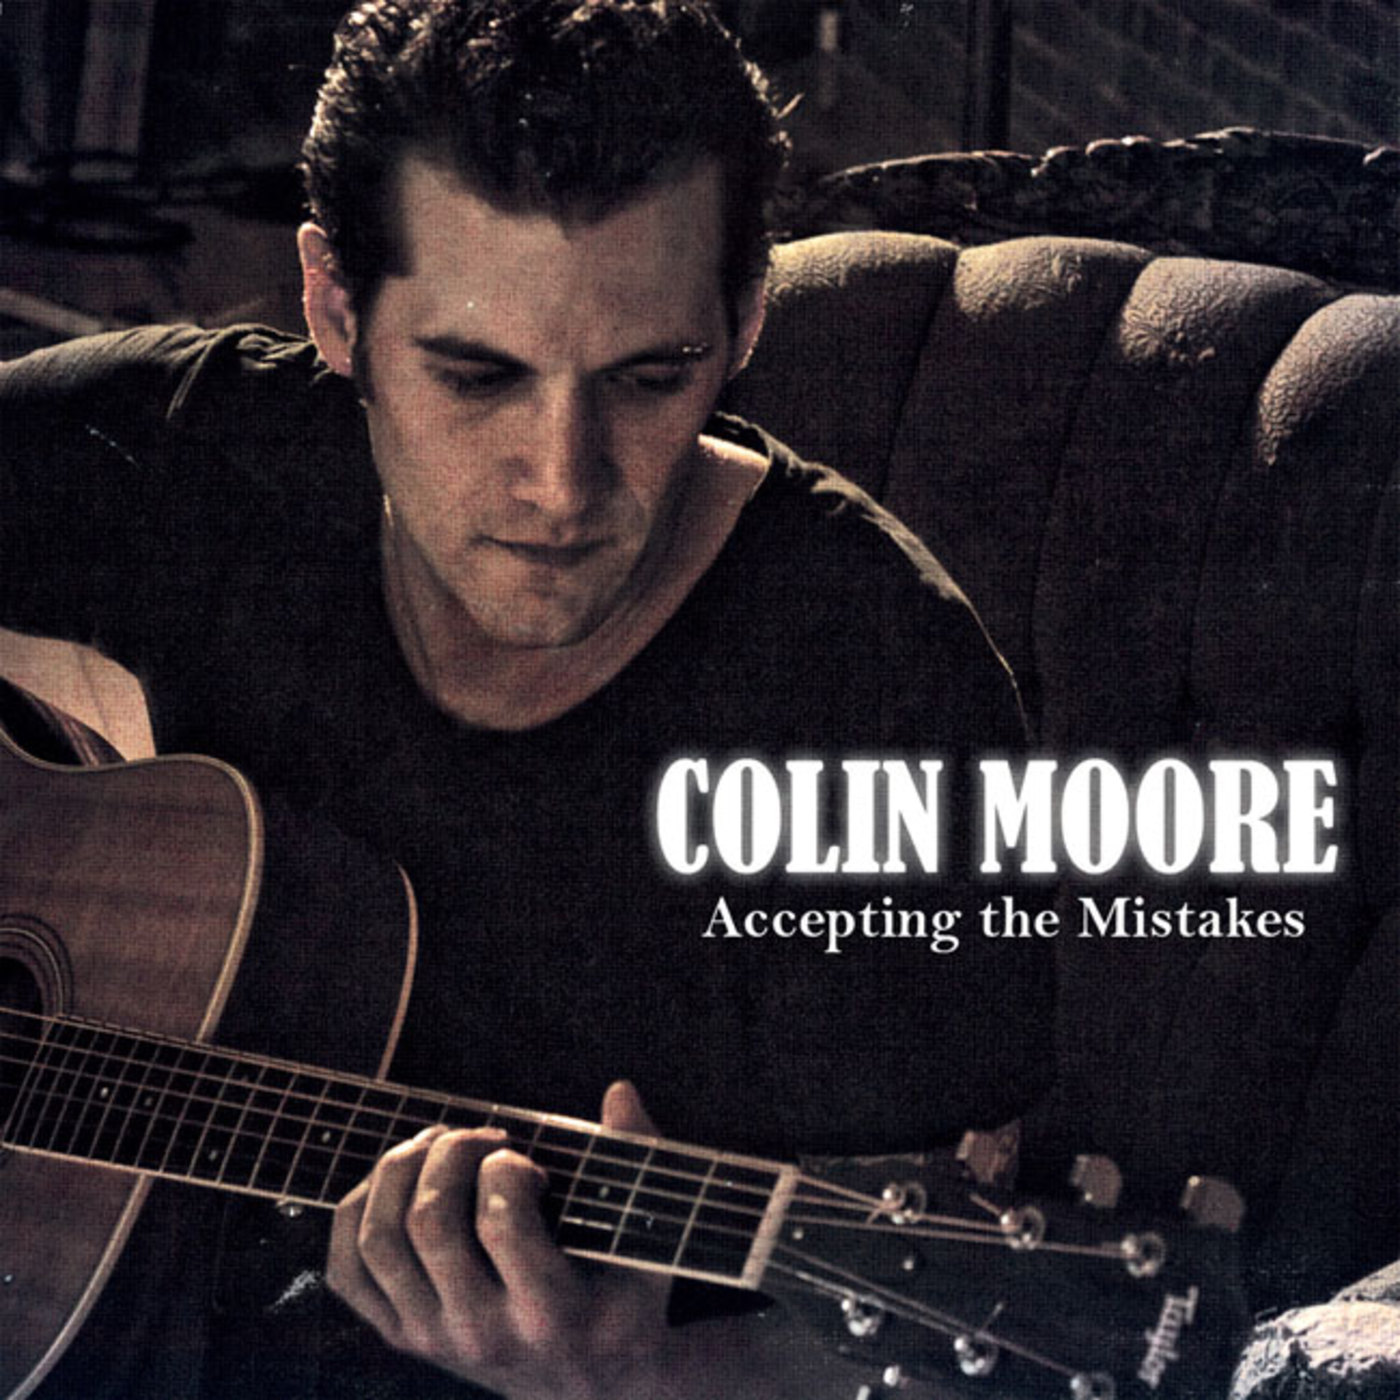 Colin Moore - Accepting the Mistakes